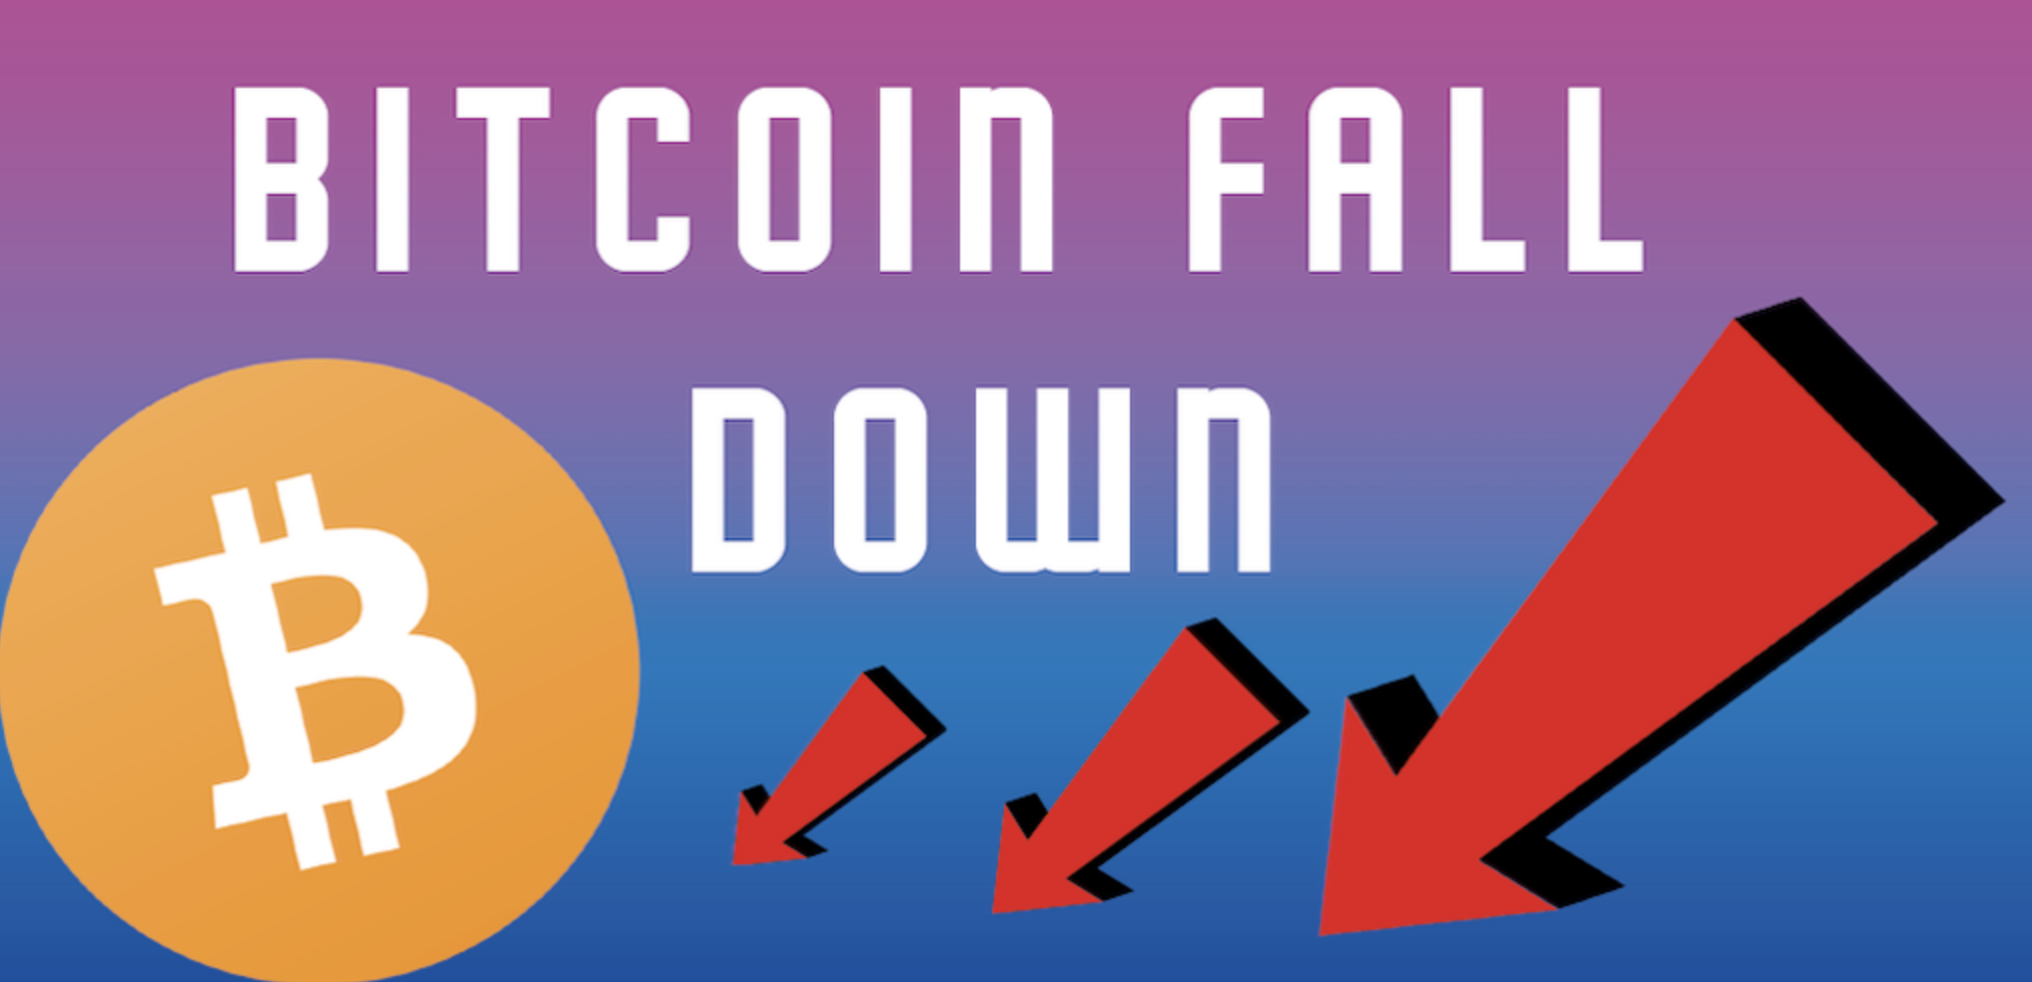 Why Bitcoin Fall Down:  A sudden slide of 11% to below $45,000 since last April